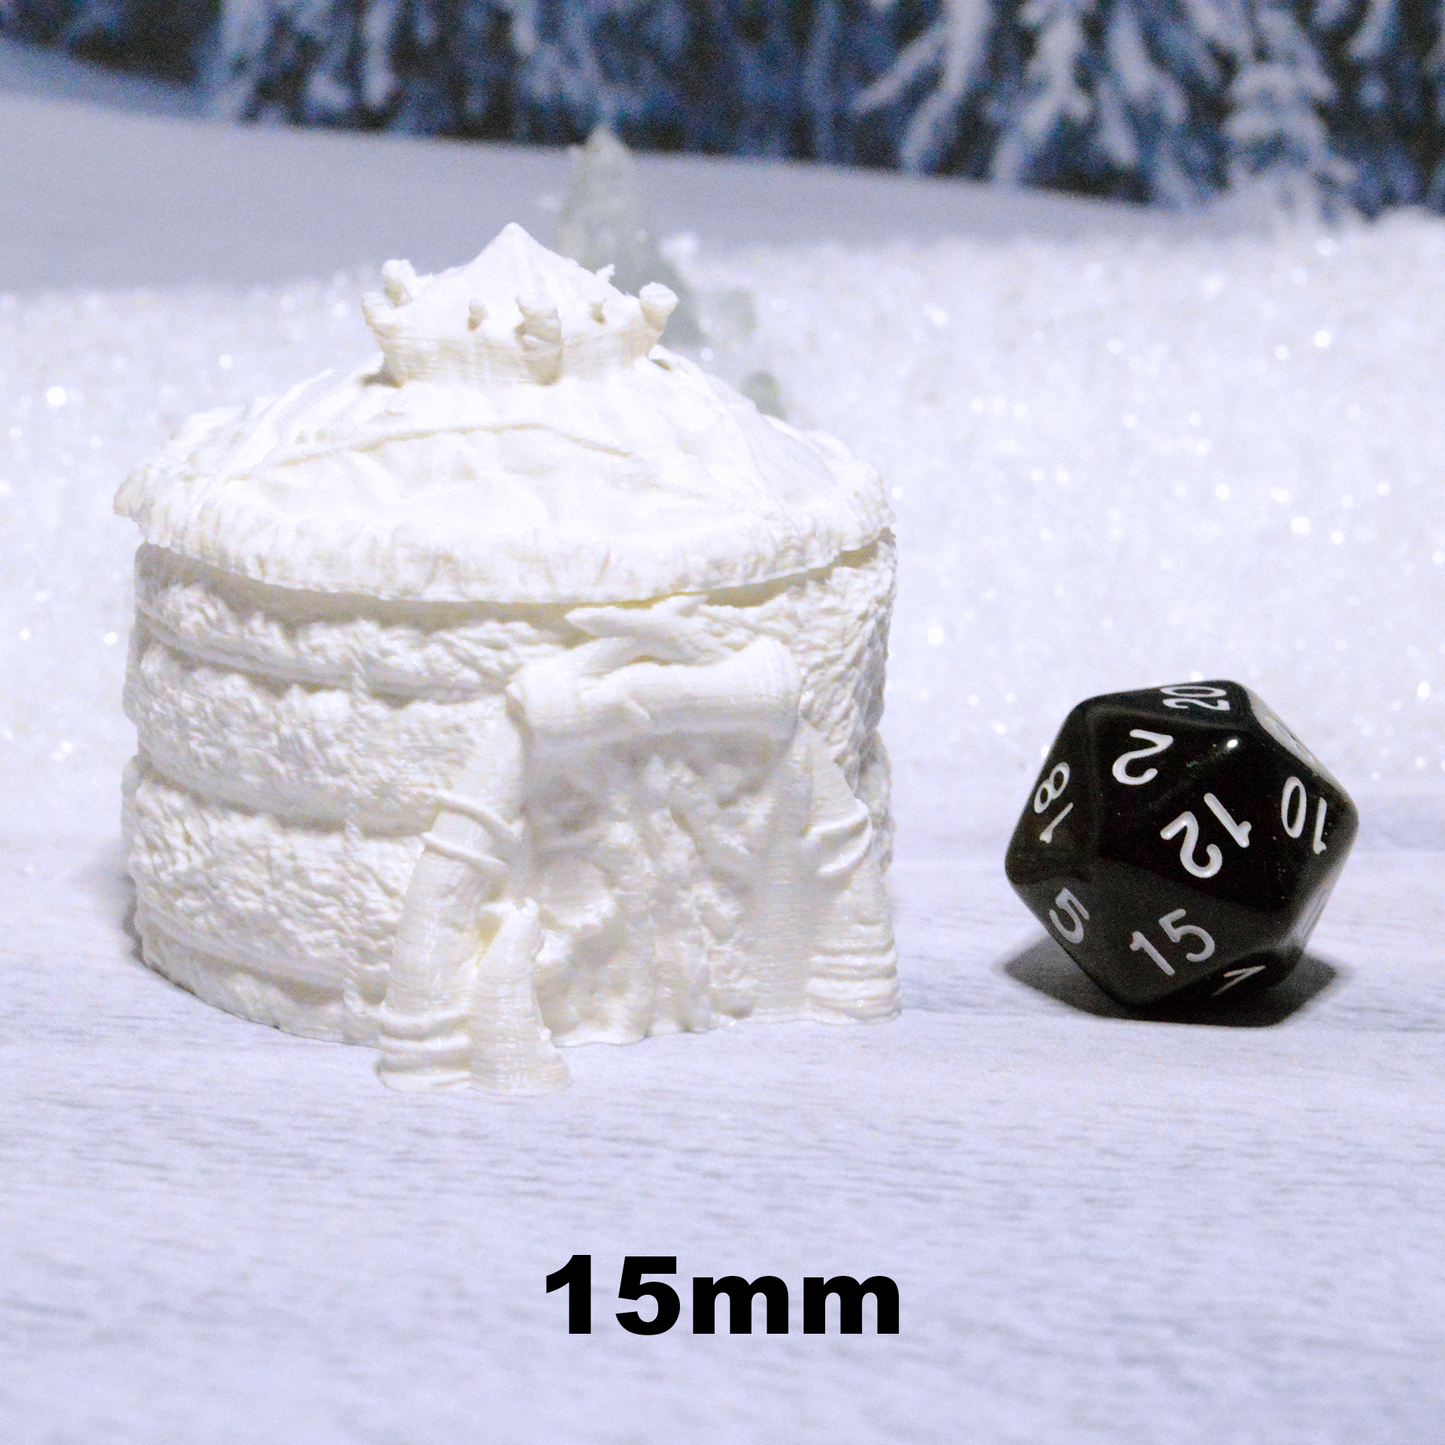 Miniature Arctic Hut for D&D Icewind Dale Terrain 15mm 28mm 32mm, Tribal House for DnD Rime of the Frostmaiden, Pathfinder Frozen Snowy Icy